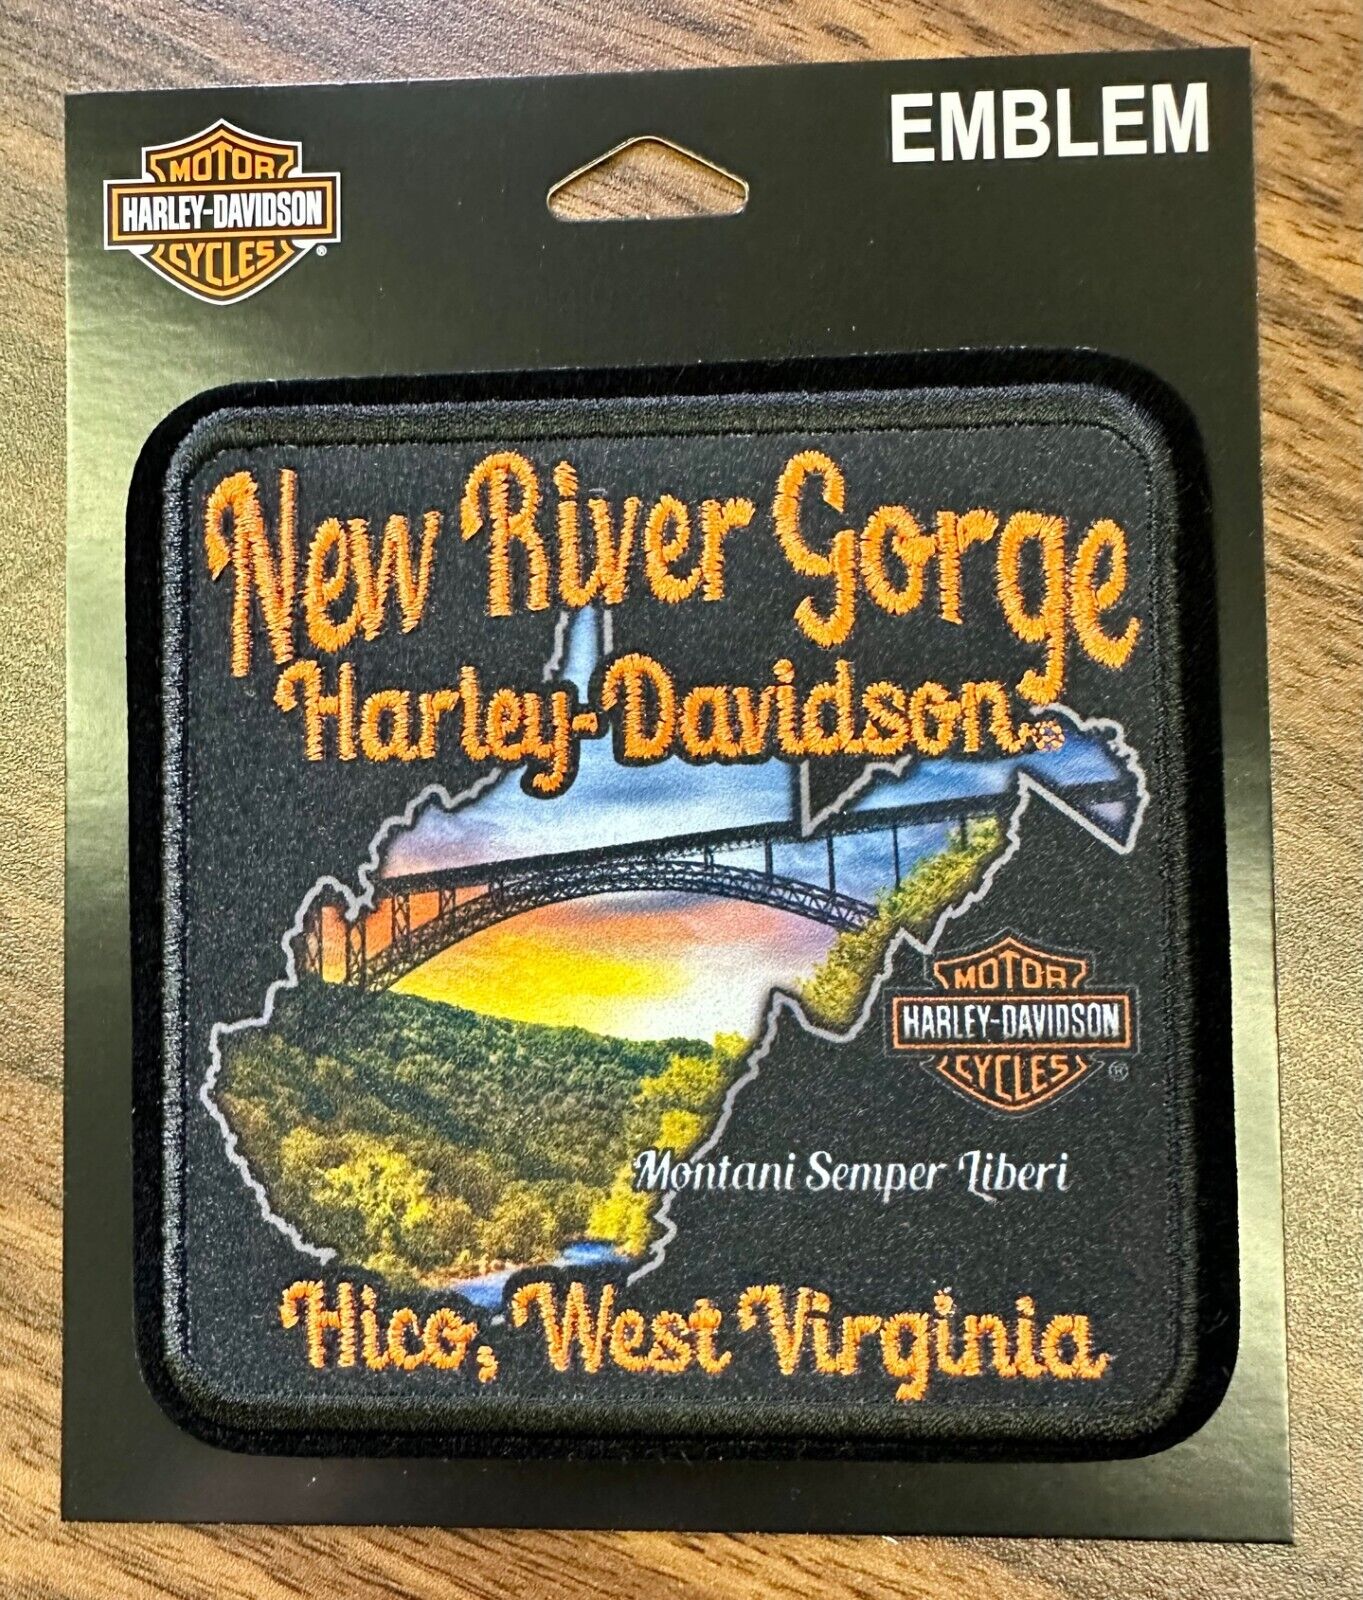 Harley-Davidson New River Gorge Hico West Virginia Dealer Patch New in Package